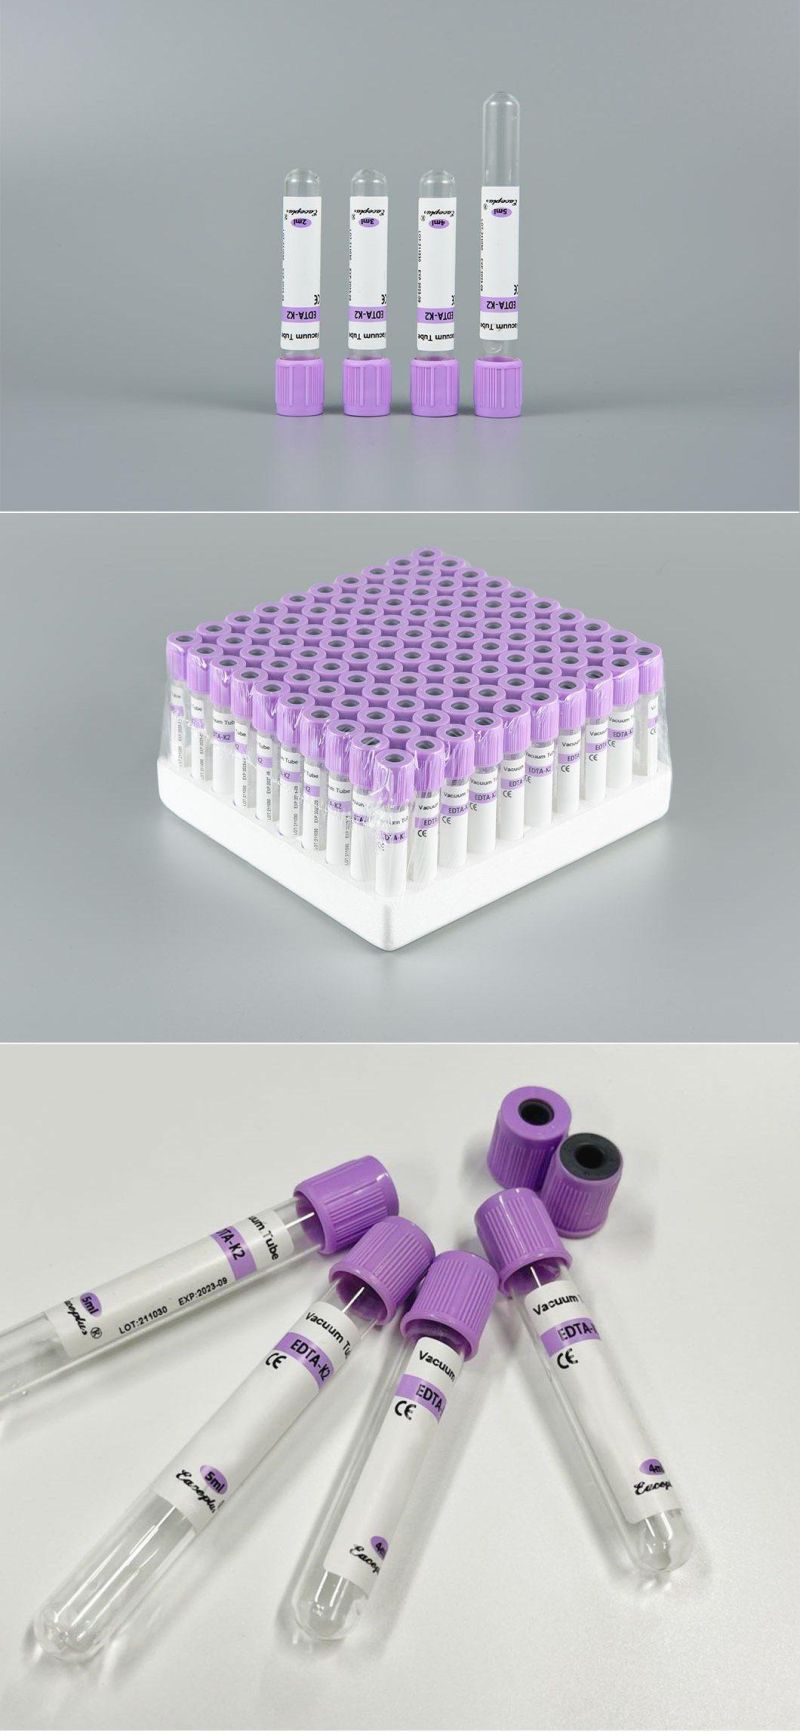 Siny Medical Single-Use Plastic Glass EDTA Serum Vacuum Blood Collection Tubes with CE